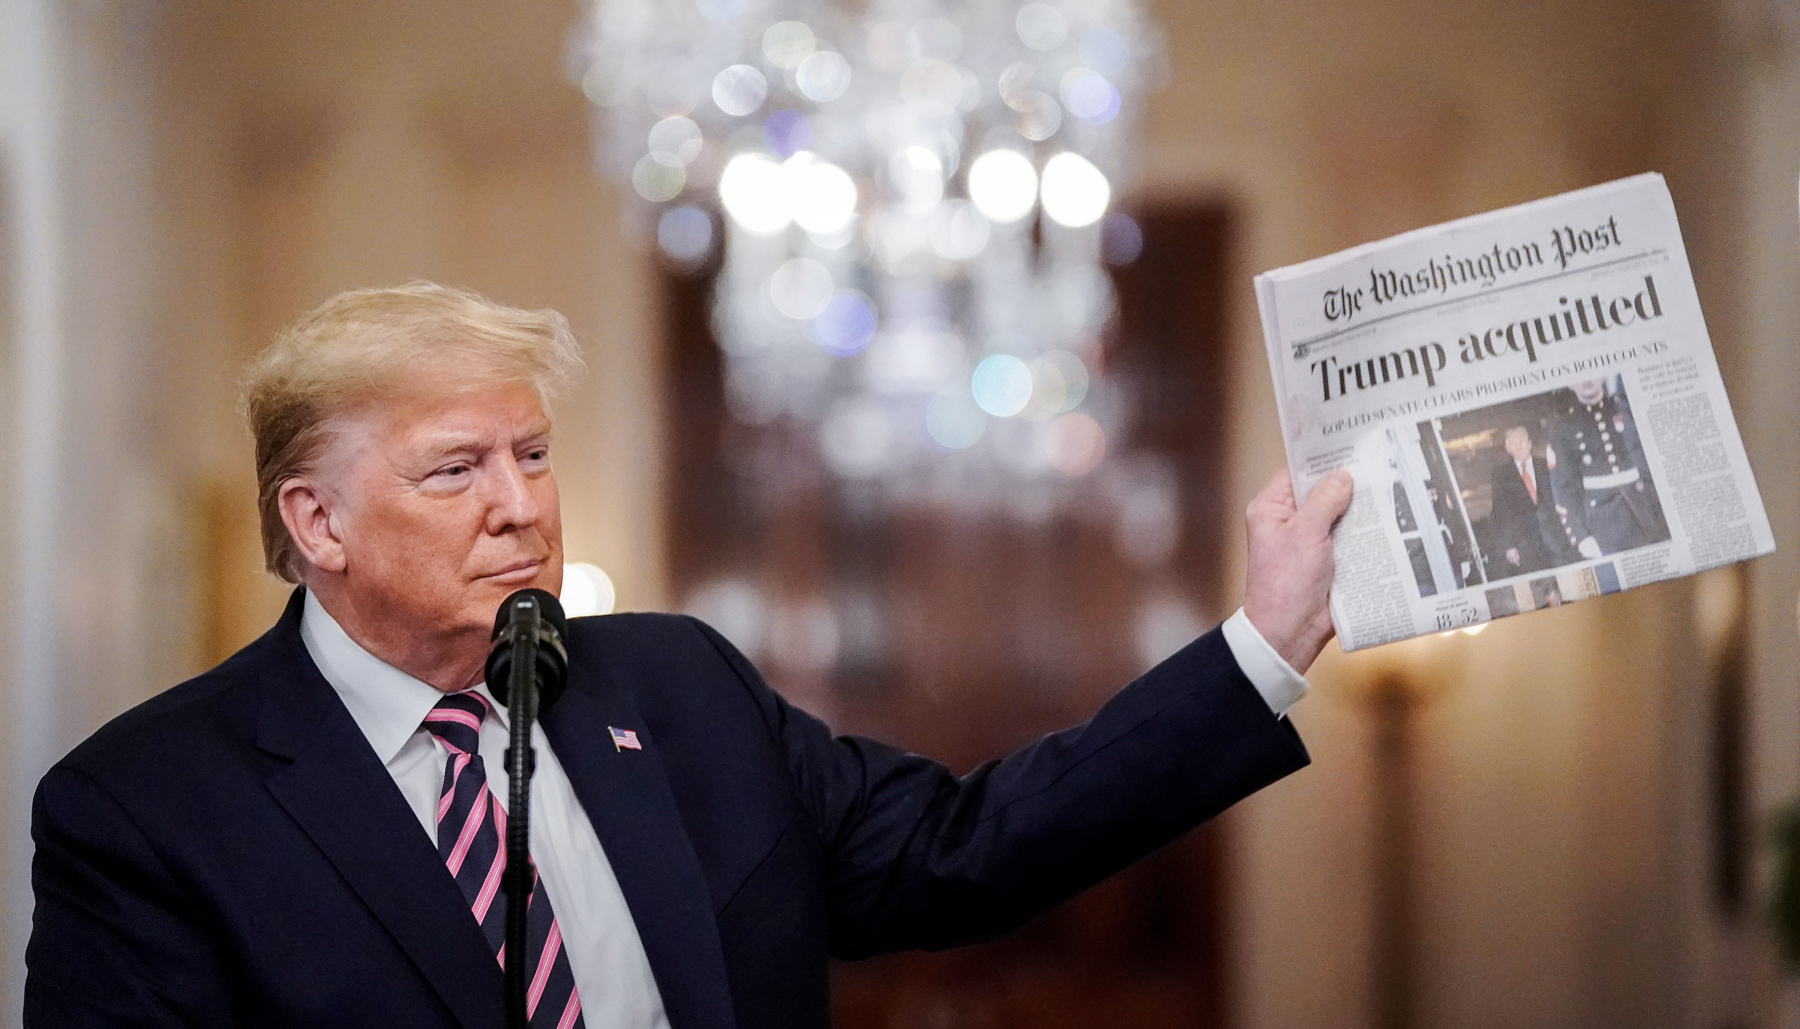 Former President Trump holds up a copy of the Washington Post that reads "Trump acquitted"